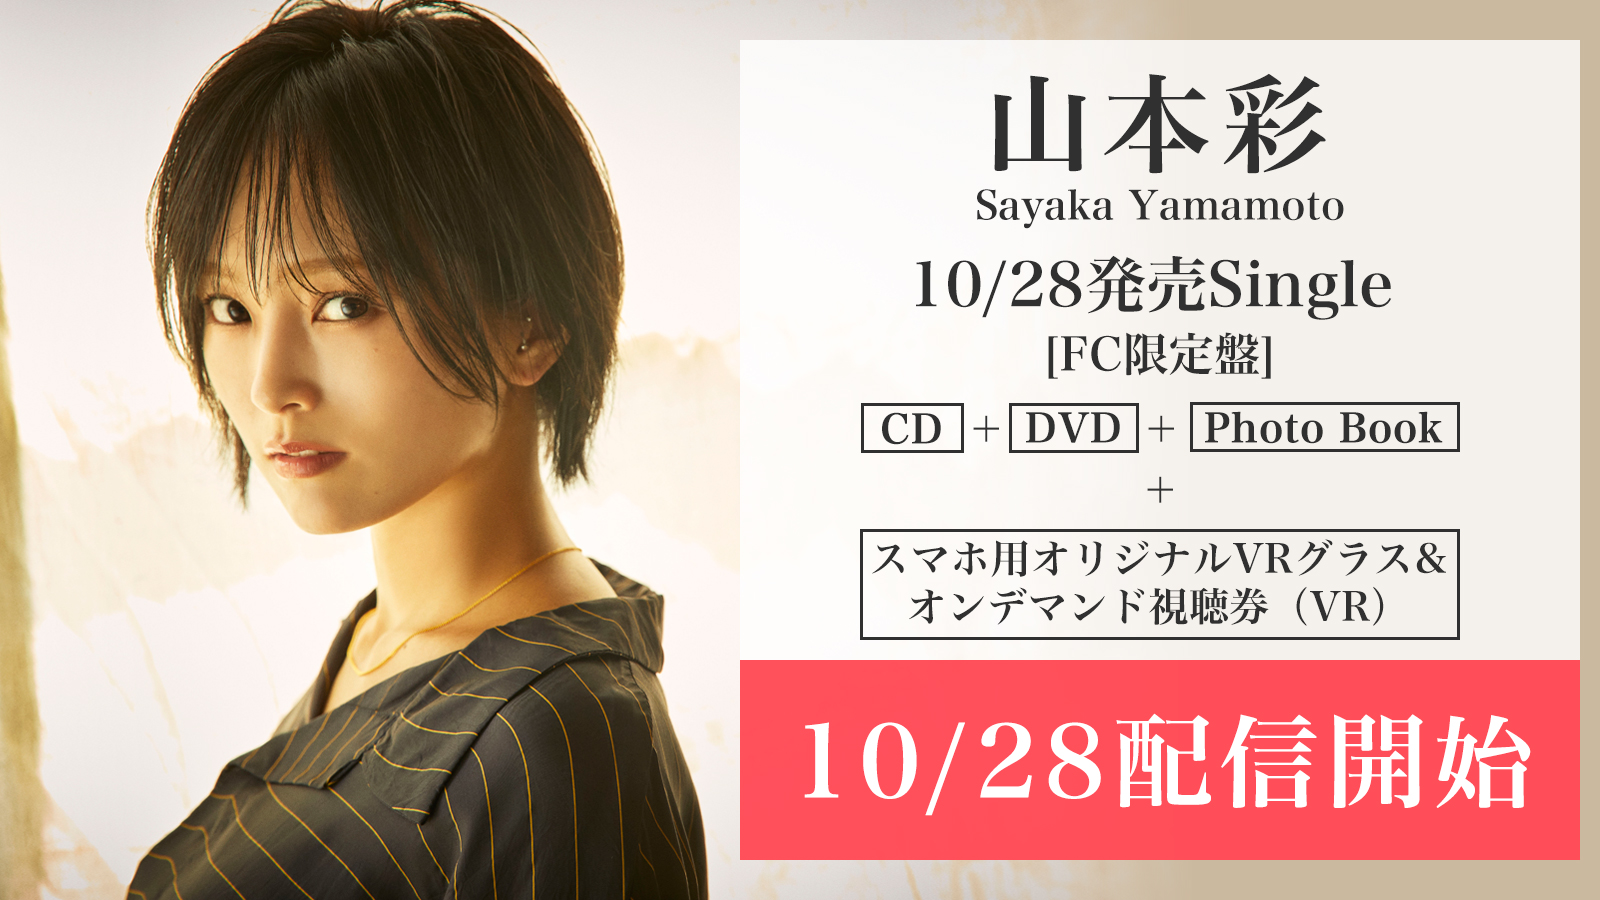 You are currently viewing 山本彩10月28日発売 4th Single FC限定盤 [CD+DVD+特典スマホ専用VRグラス&オンデマンド視聴券（VR）+Photo Book]VR配信のお知らせ